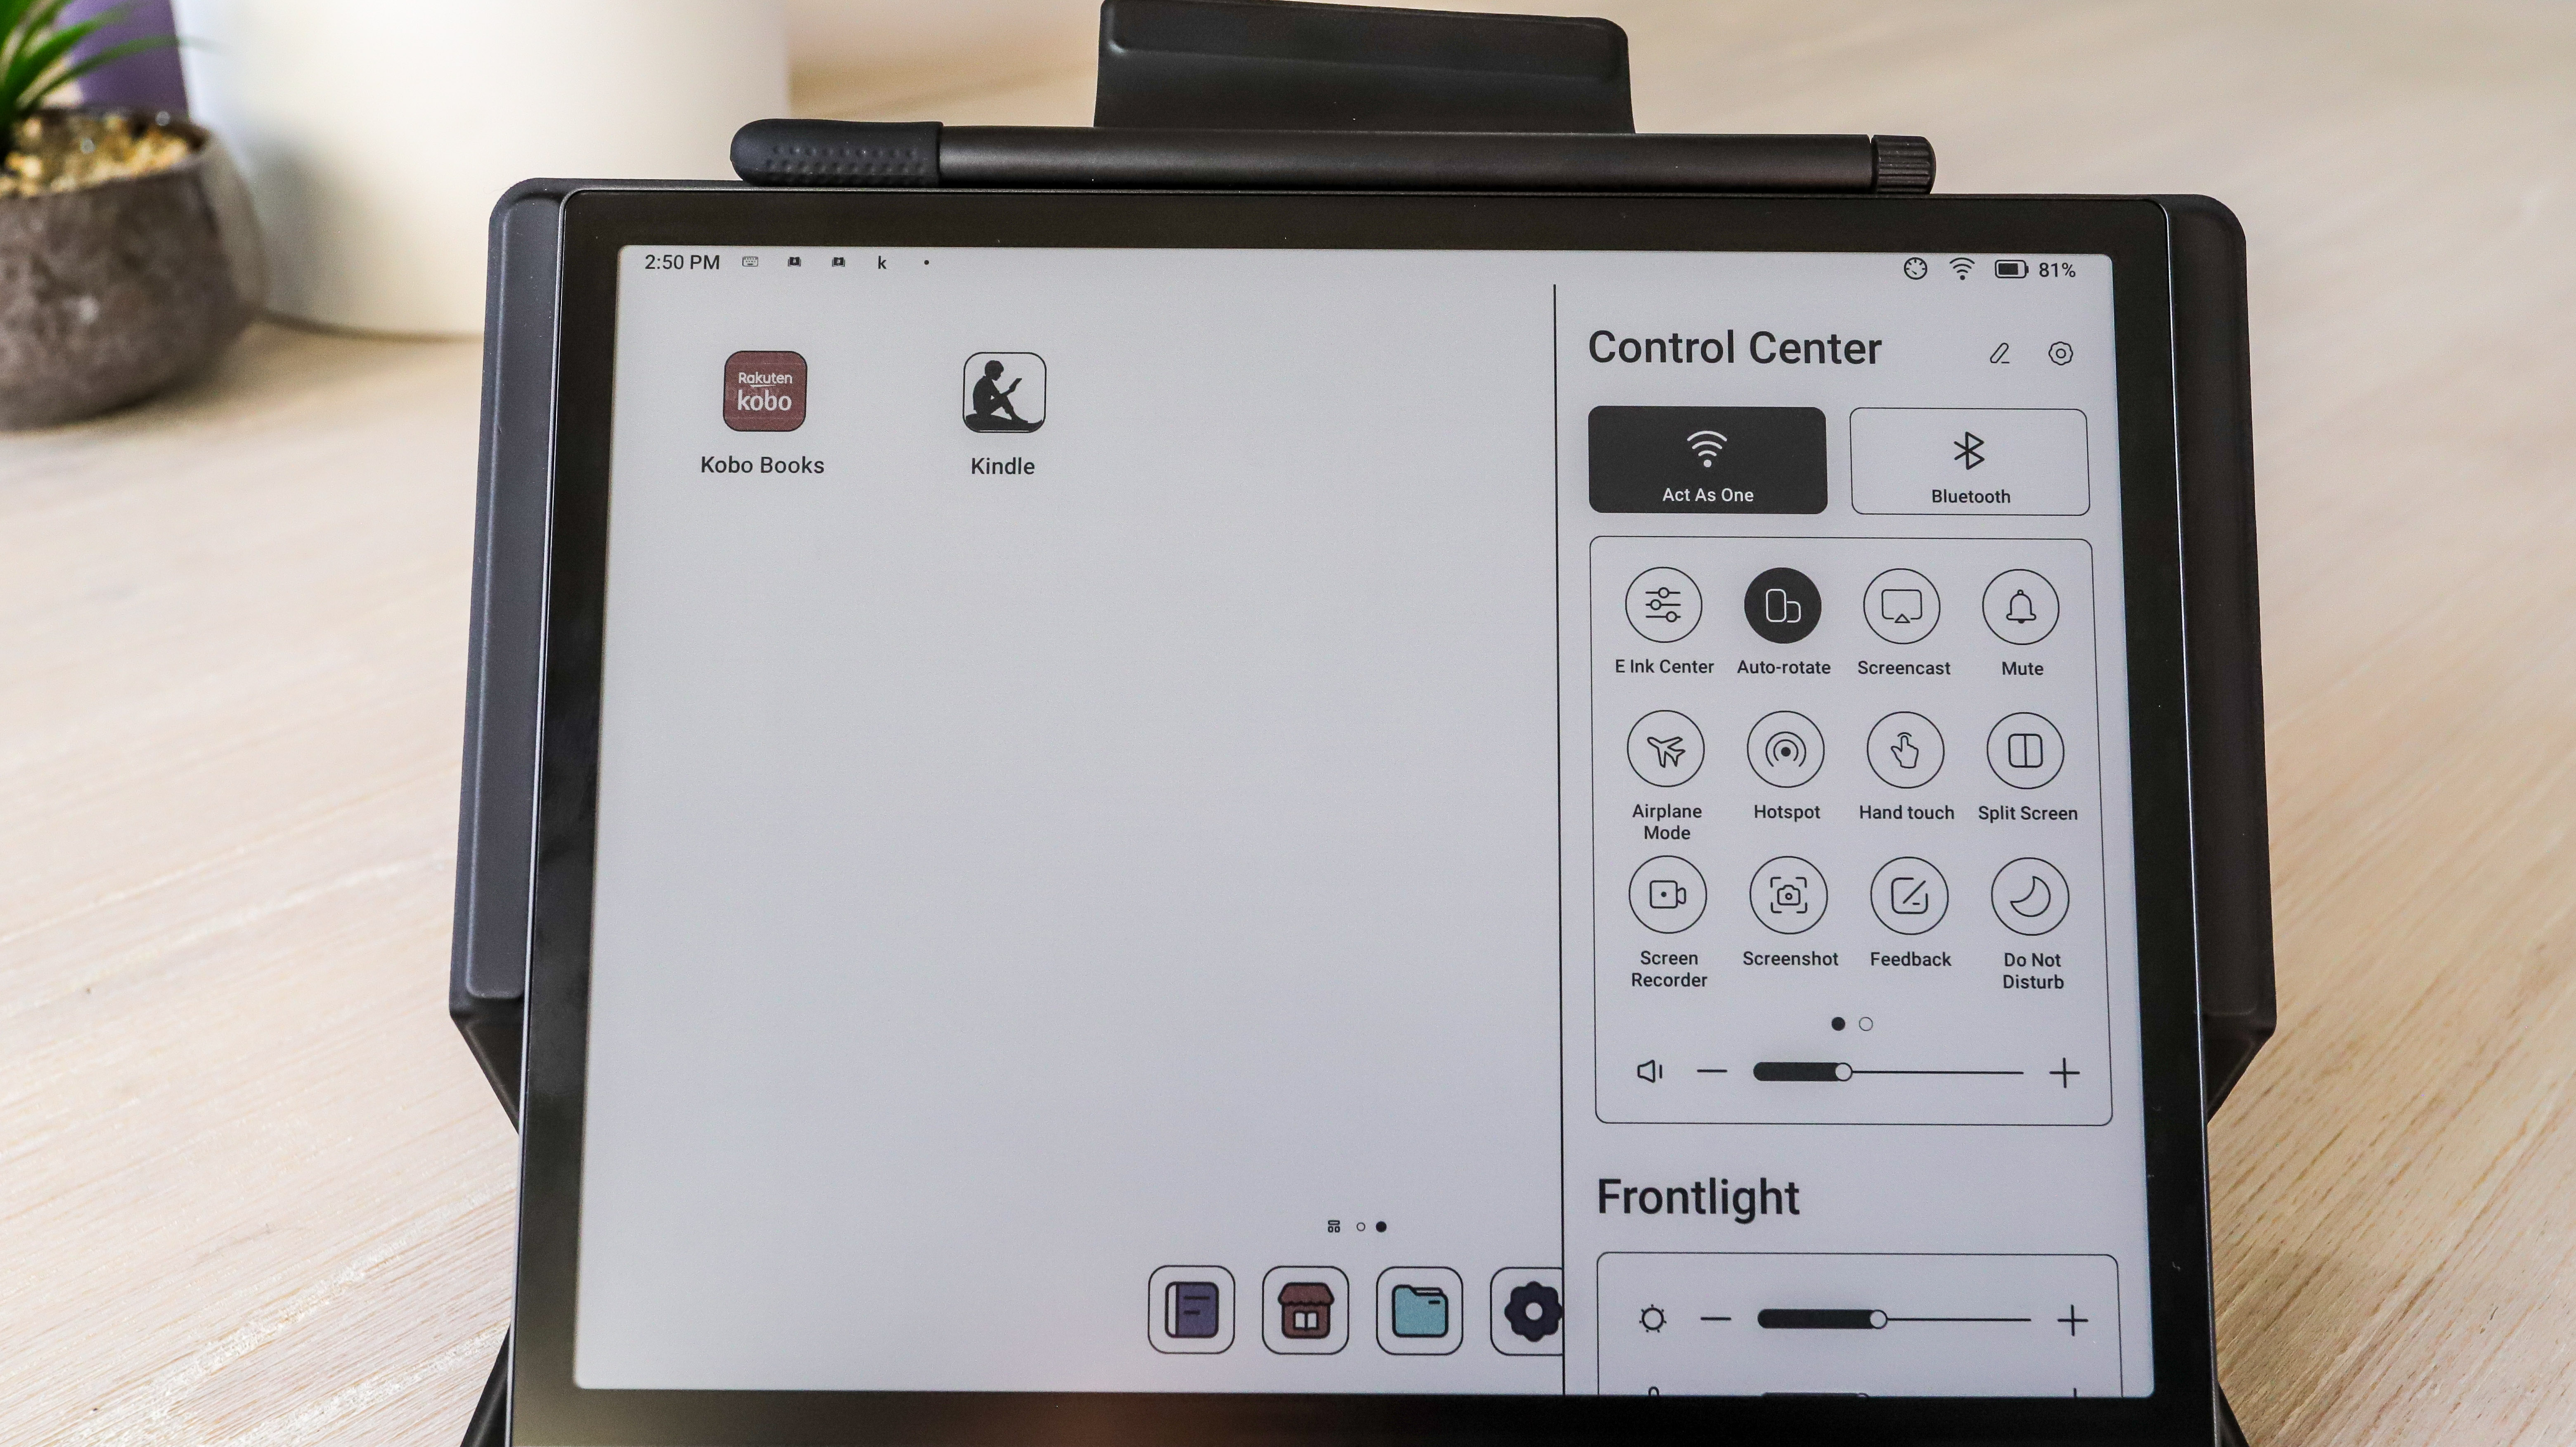 The Control Center of the Onyx Boox Tab Ultra C